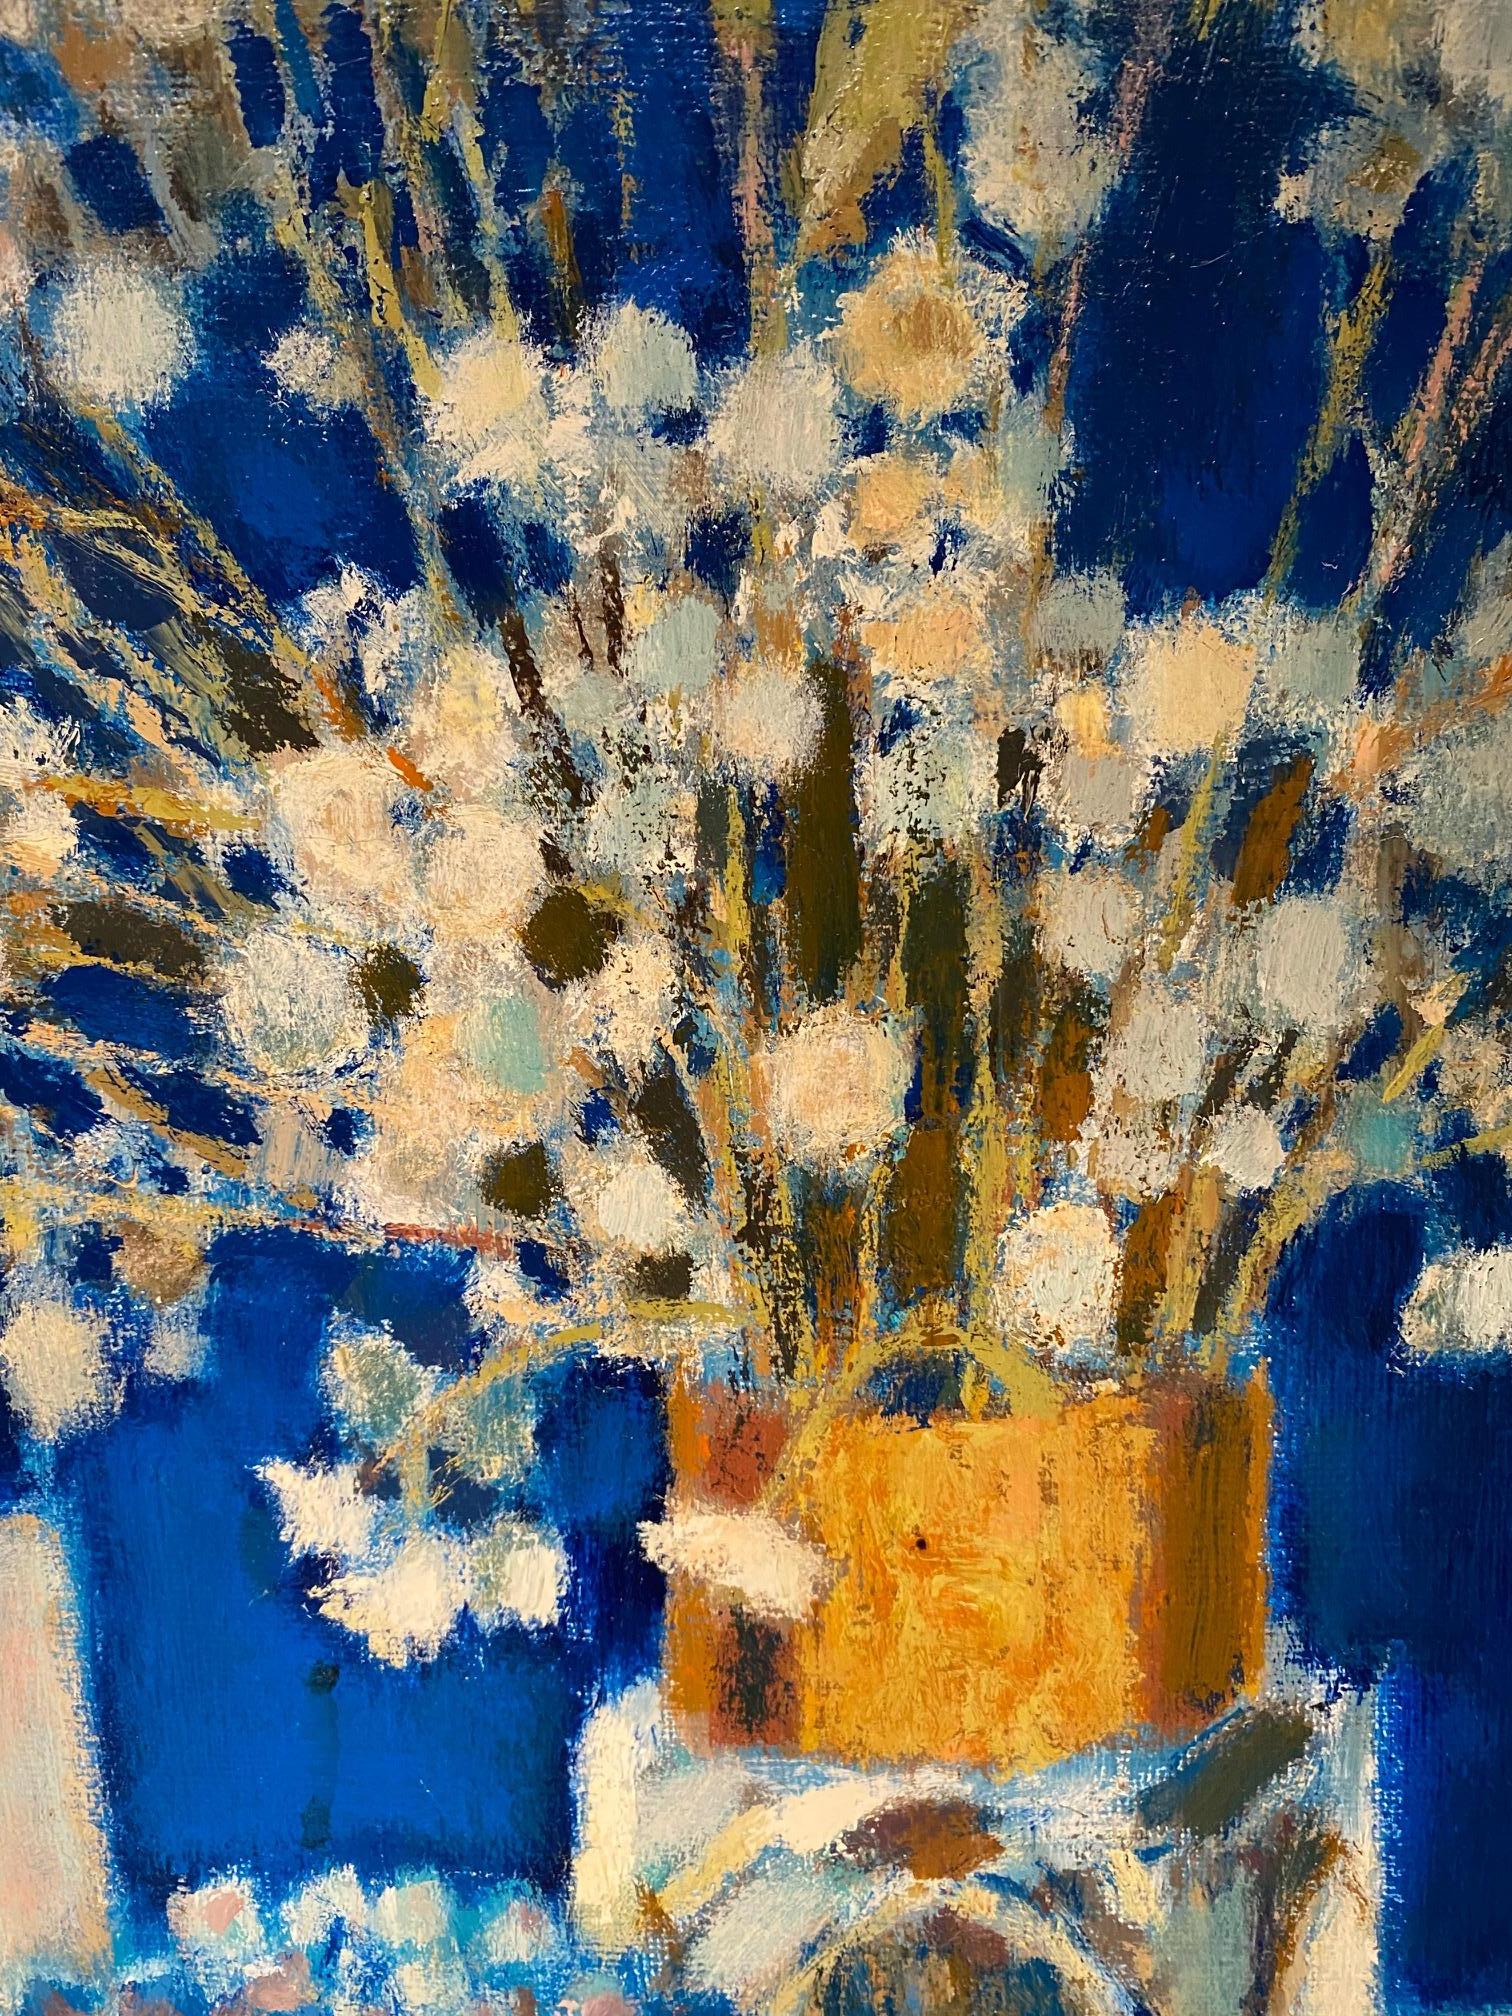 Harmony in blue by Pierre Poulain - Oil on canvas 50x65 cm For Sale 6